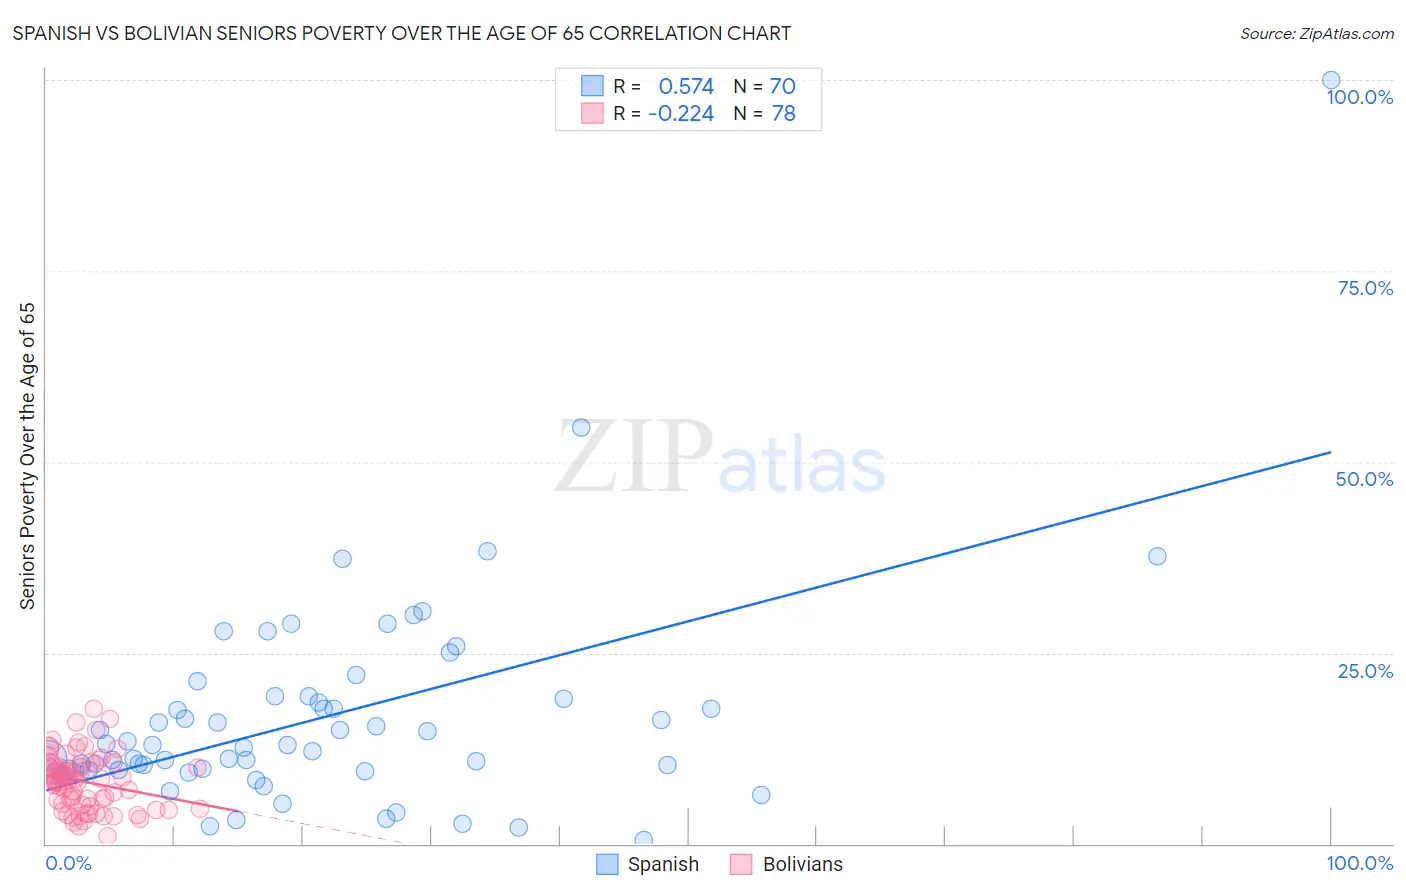 Spanish vs Bolivian Seniors Poverty Over the Age of 65